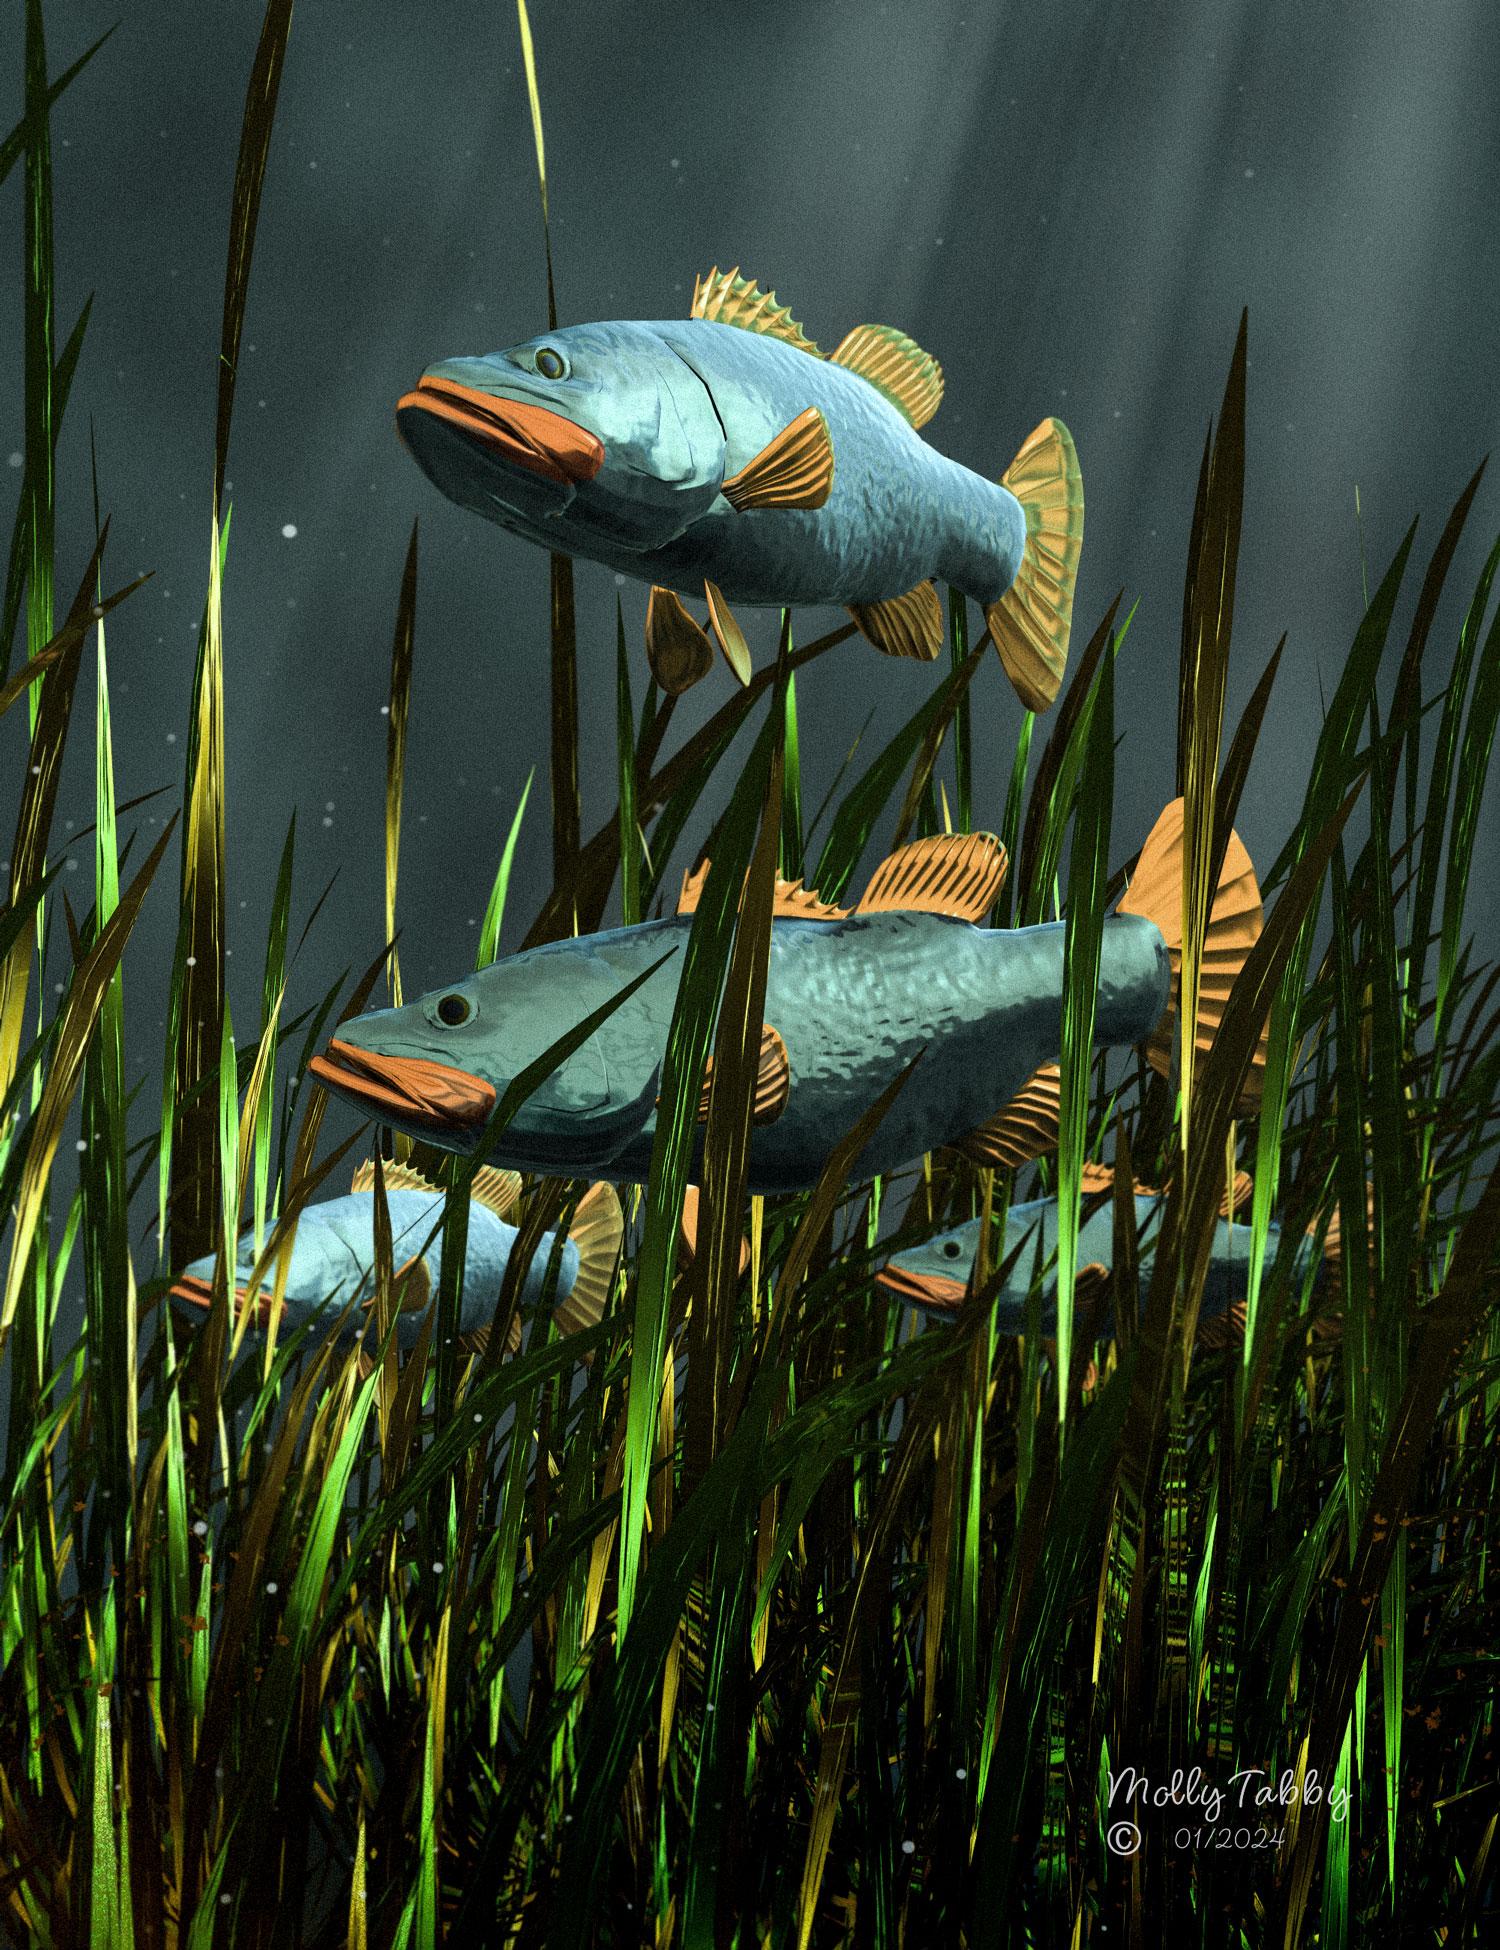 Render image of fish created for Lola Lane's Render of the Month Challenge 2024 - Fish